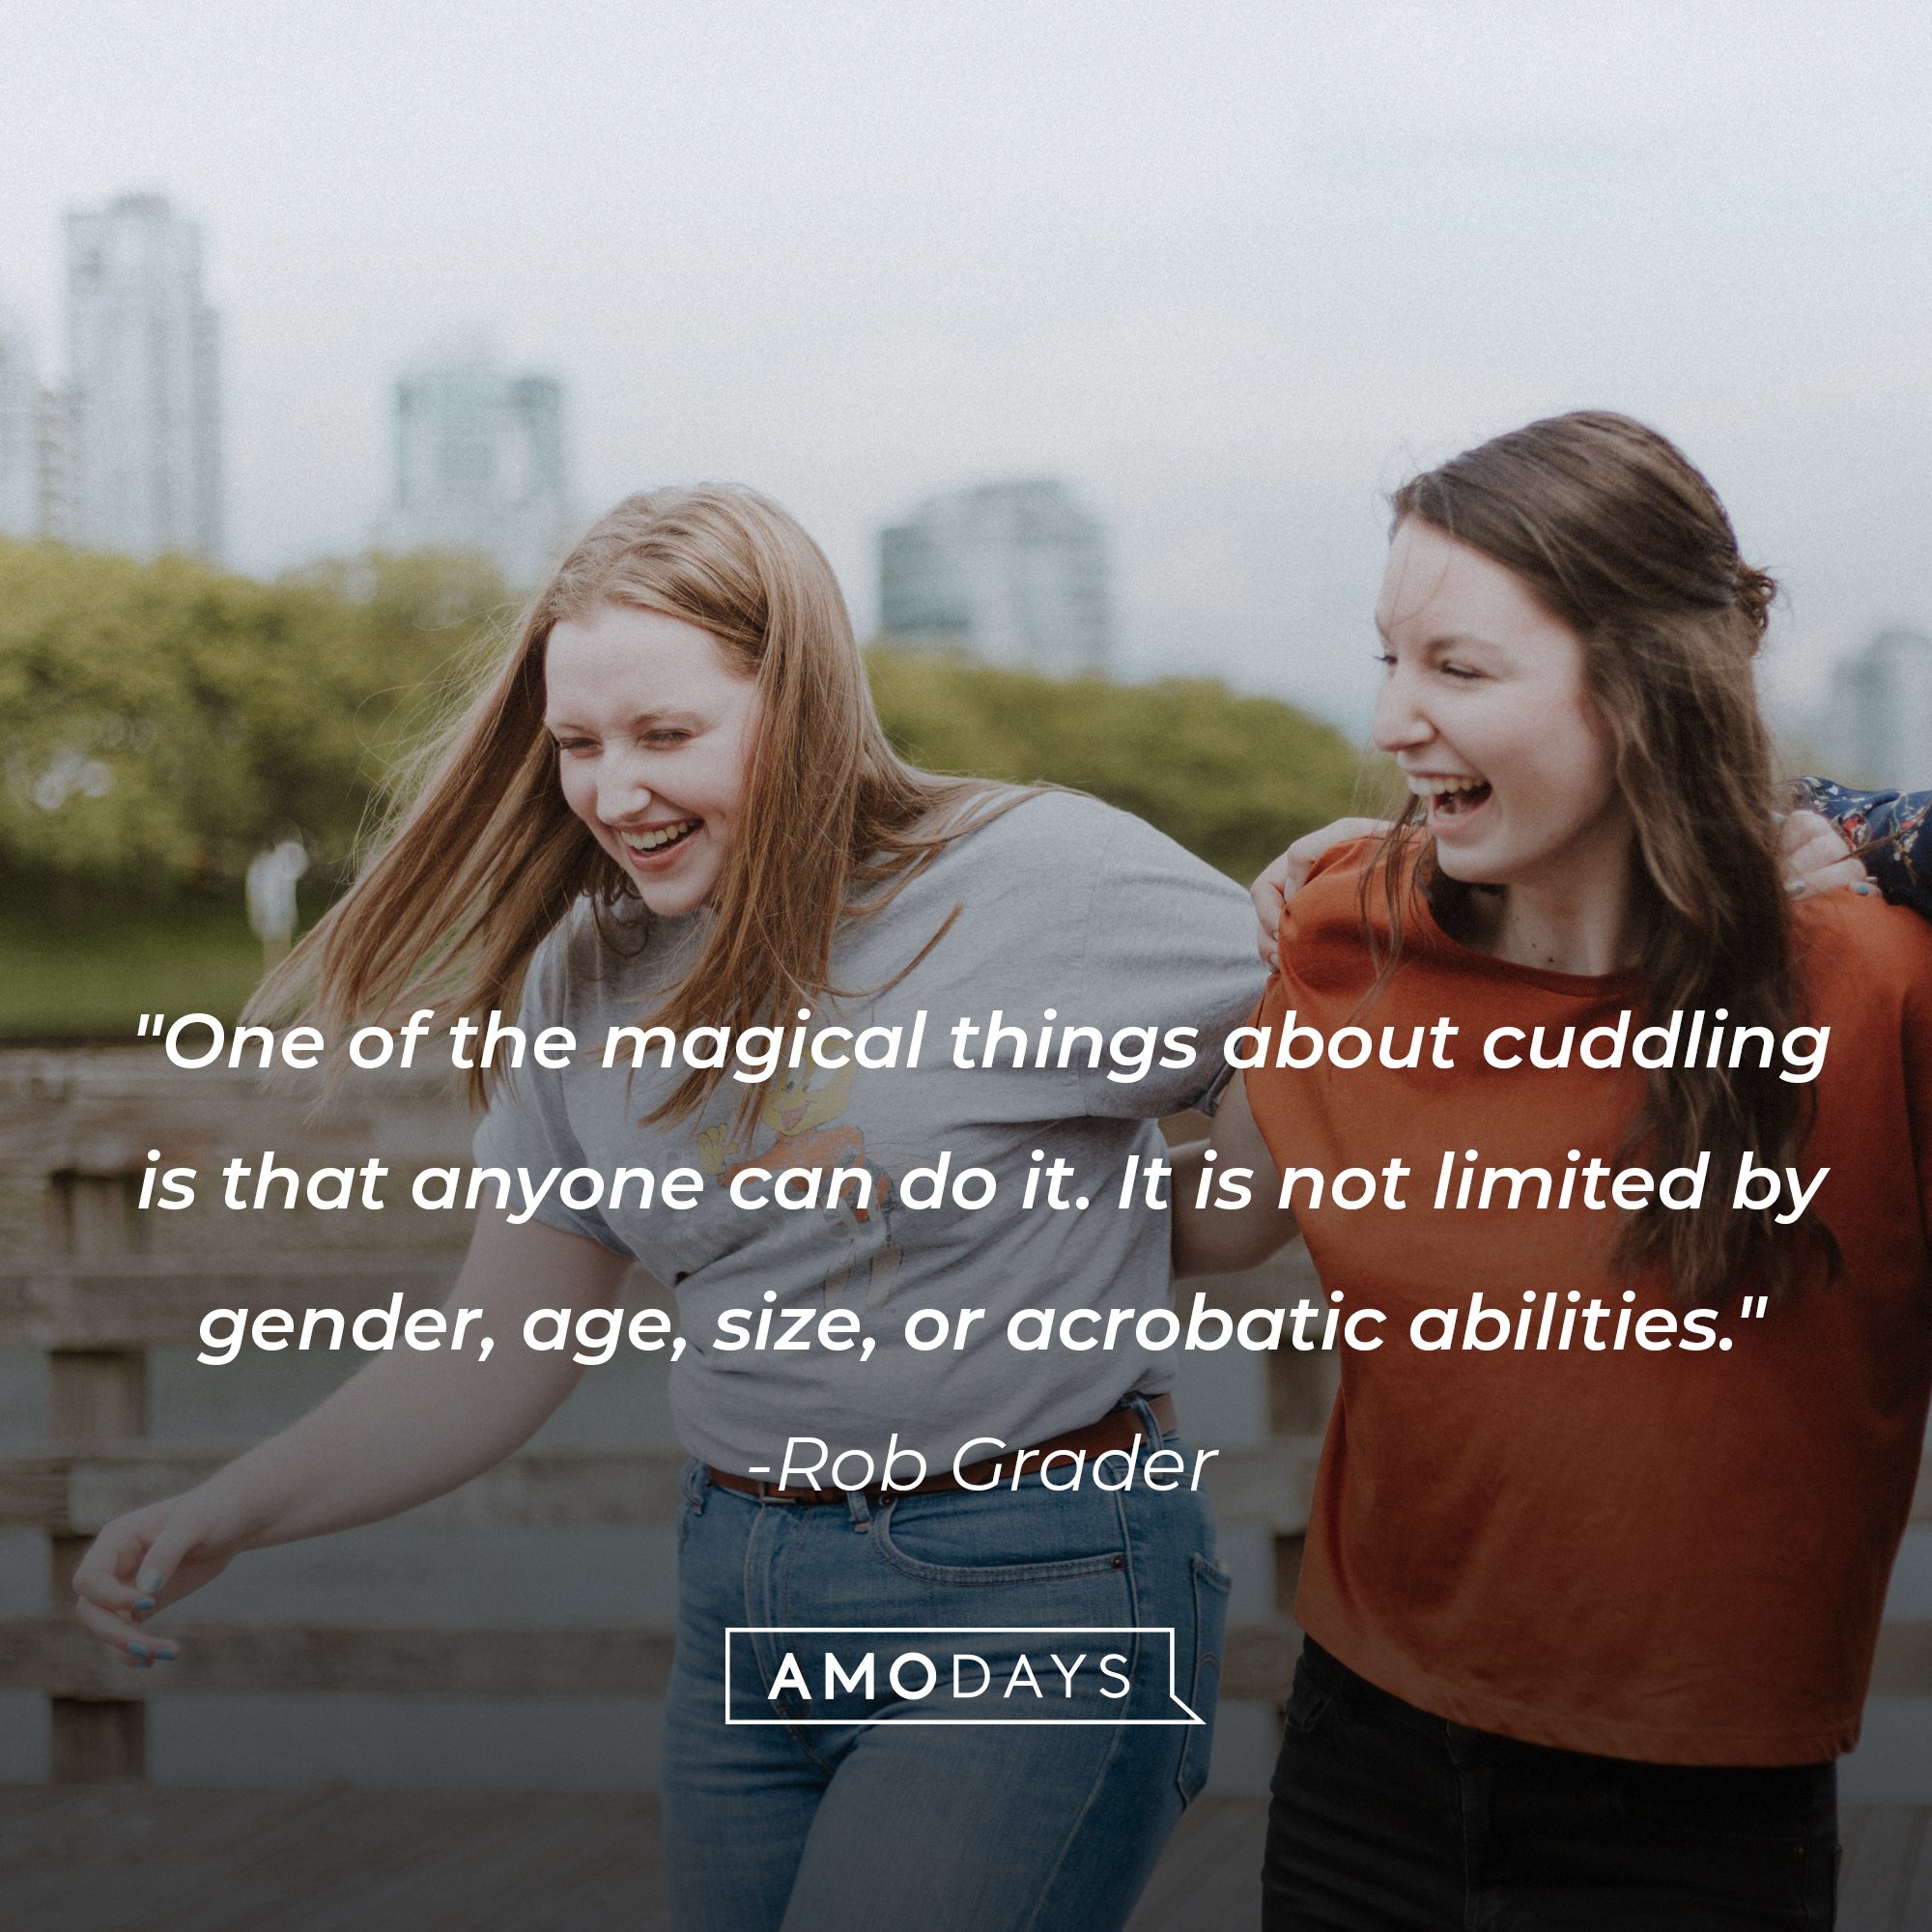 Rob Grader's quote: "One of the magical things about cuddling is that anyone can do it. It is not limited by gender, age, size, or acrobatic abilities." | Image: AmoDays